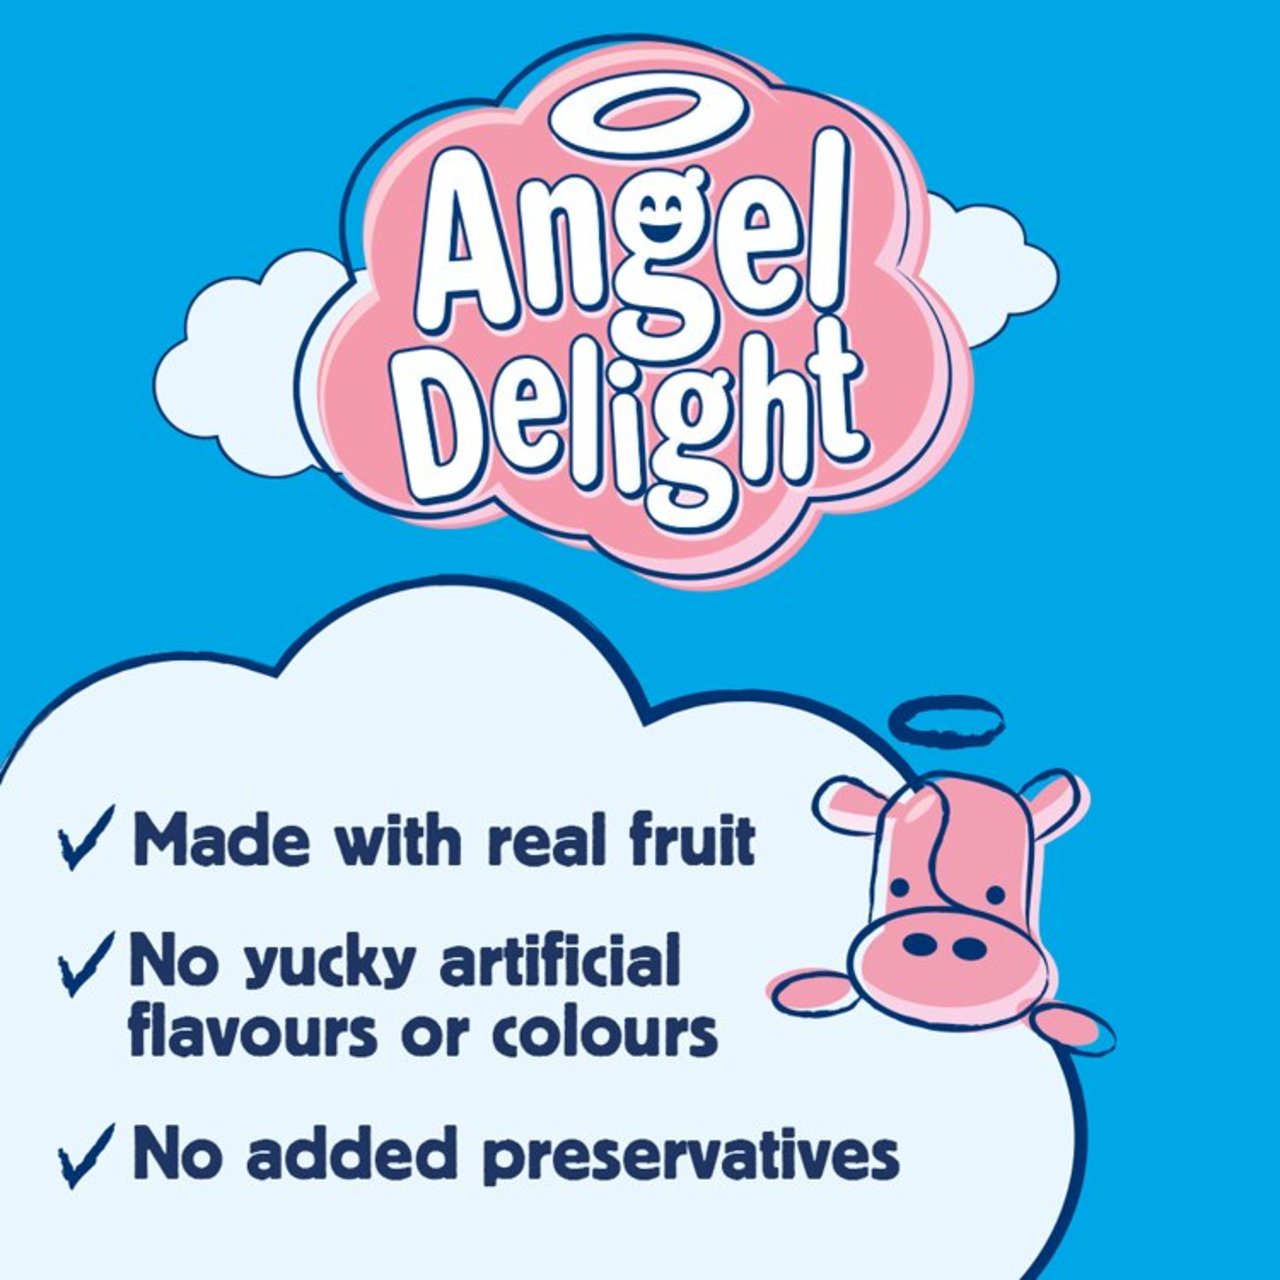 Angel Delight Strawberry Flavour 59g - Summery Delicacy